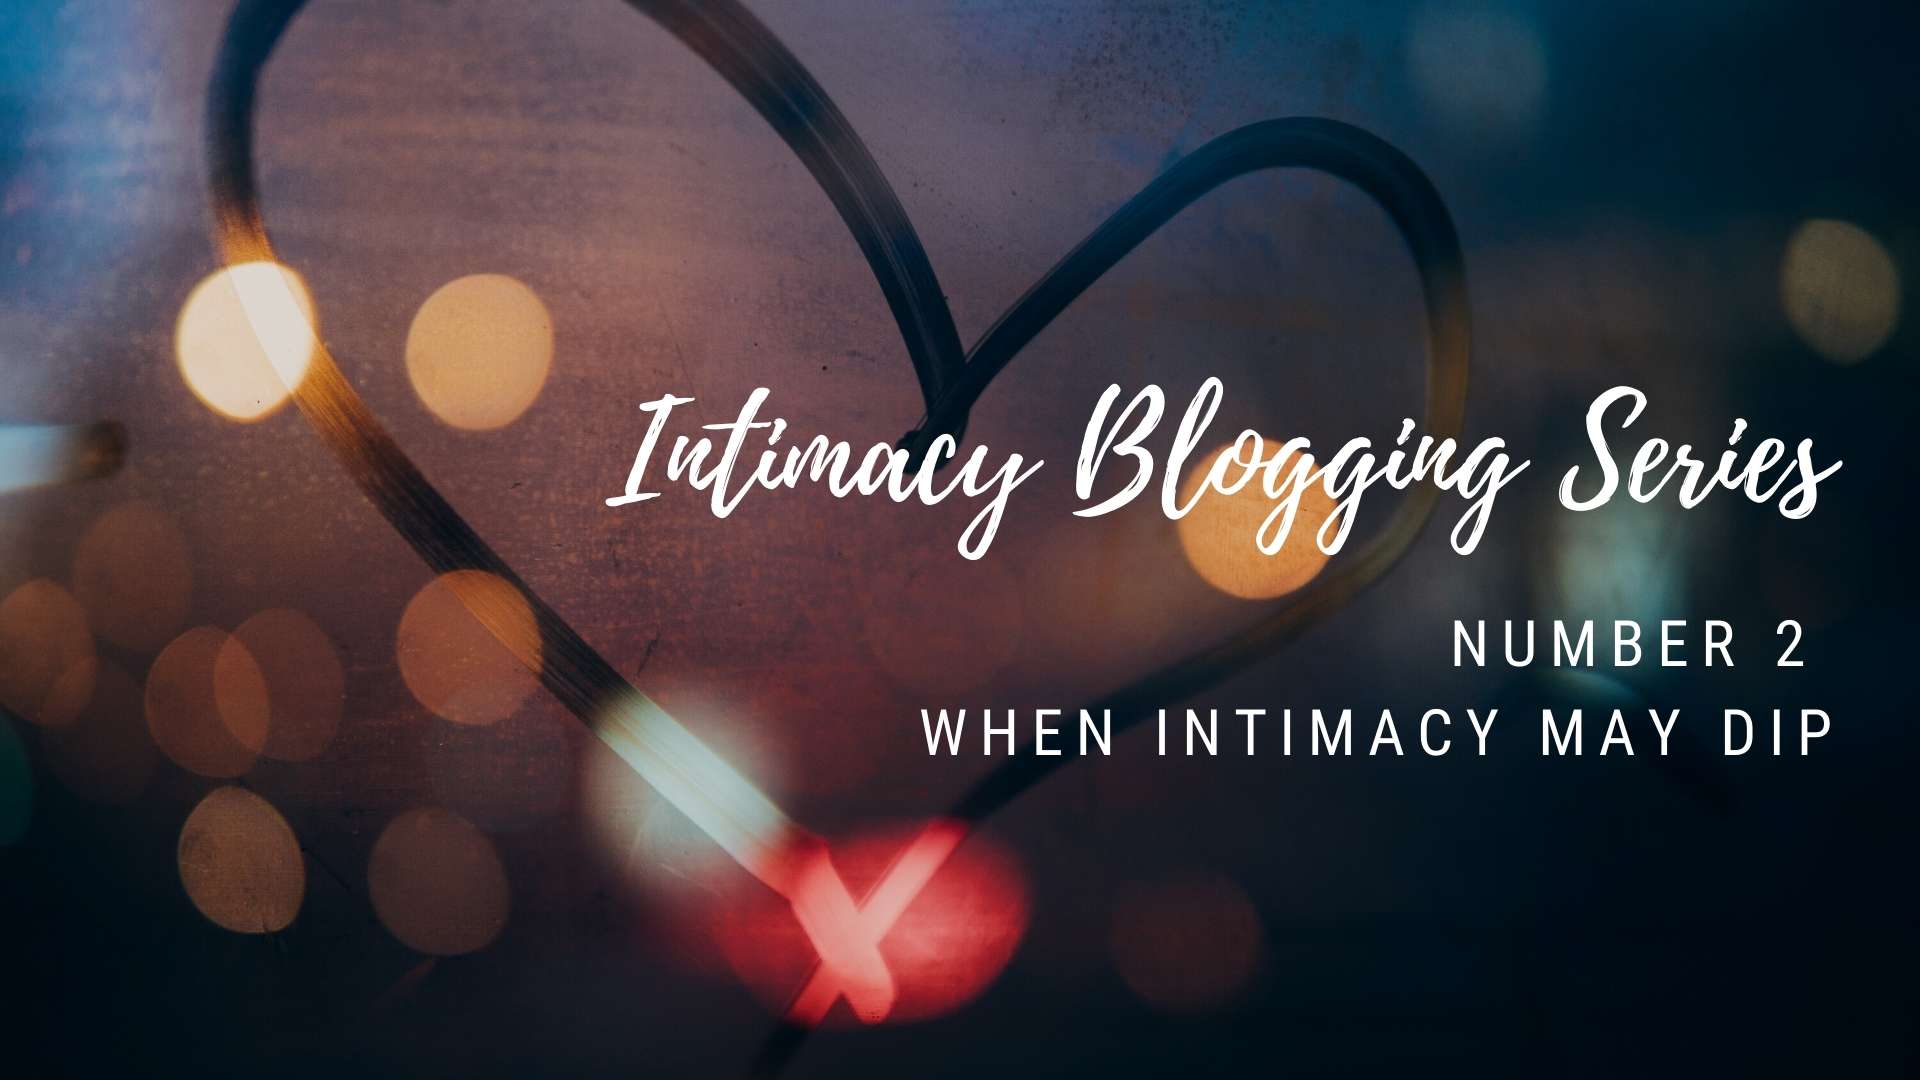 Modern Wellness Counseling San Antonio Texas Intimacy blogging series couples counseling